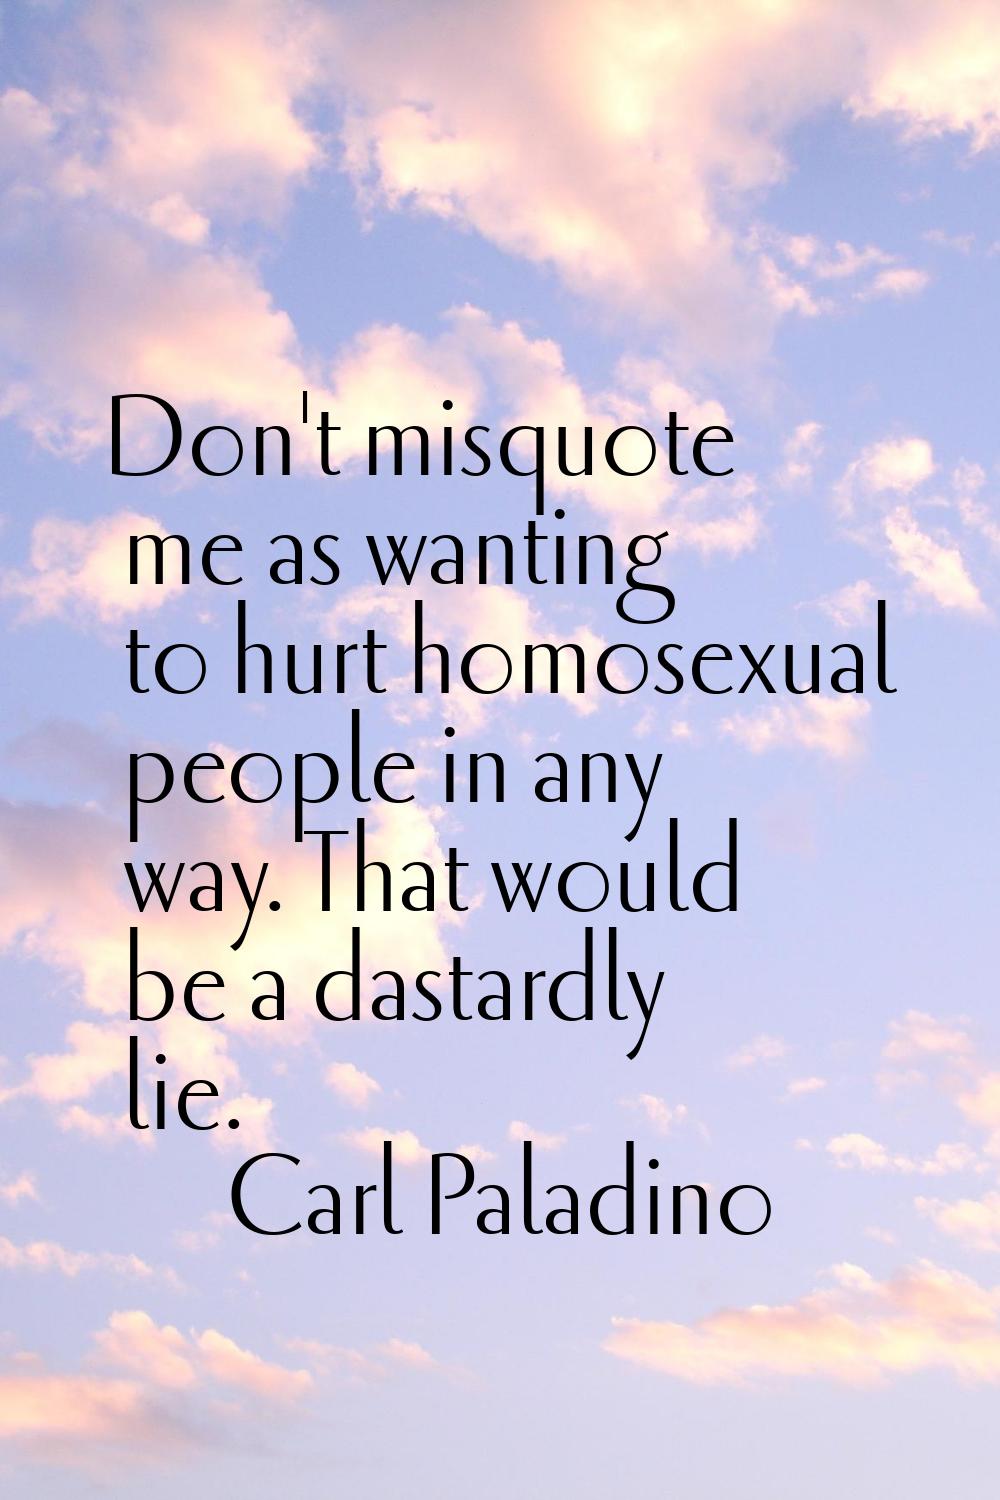 Don't misquote me as wanting to hurt homosexual people in any way. That would be a dastardly lie.